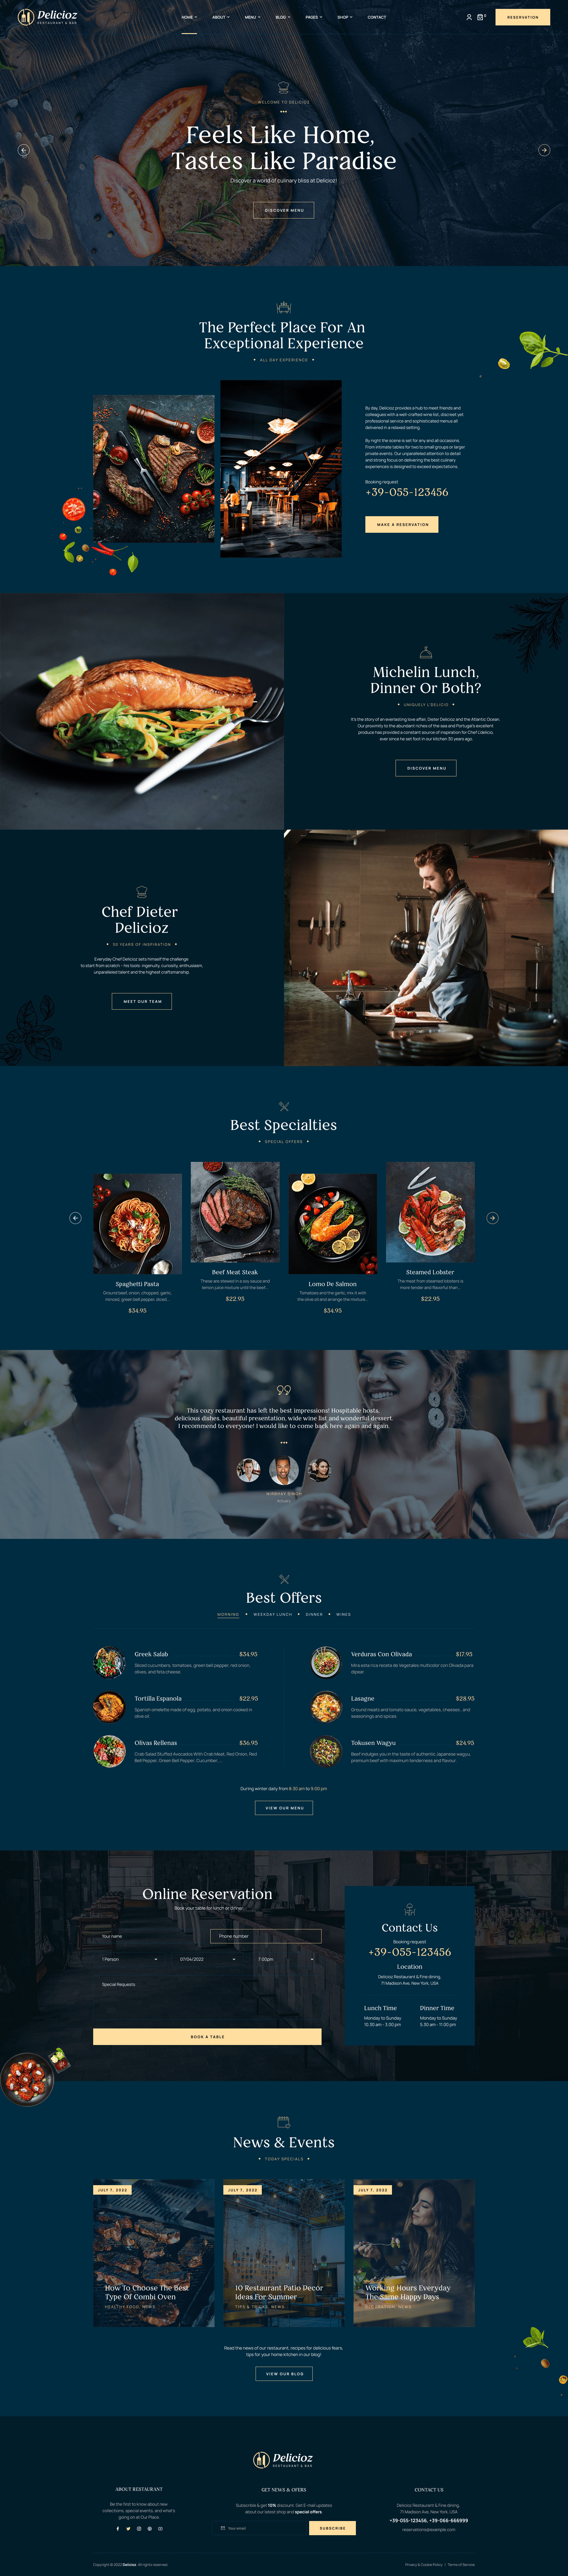 Page image of a unique restaurant theme WordPress template.